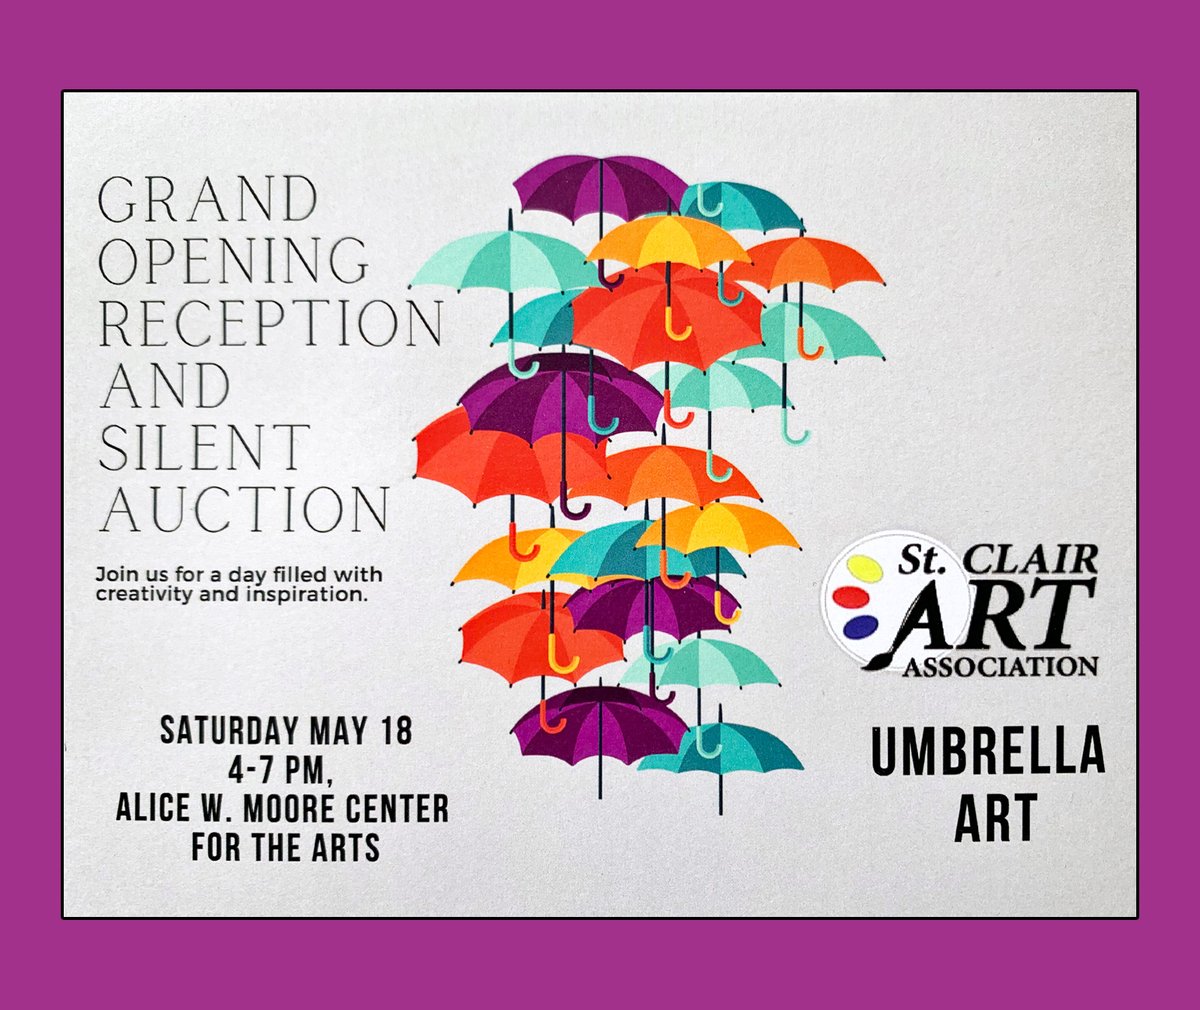 The Umbrella Event - this Saturday in St. Clair - My 'Picassorama' umbrella will be on display and up for auction. #umbrellaart #grandopening #reception #silentauction #stclairartassociation #stclairmichigan #tarahuttonartist #pohoartist #saturdaymay18th